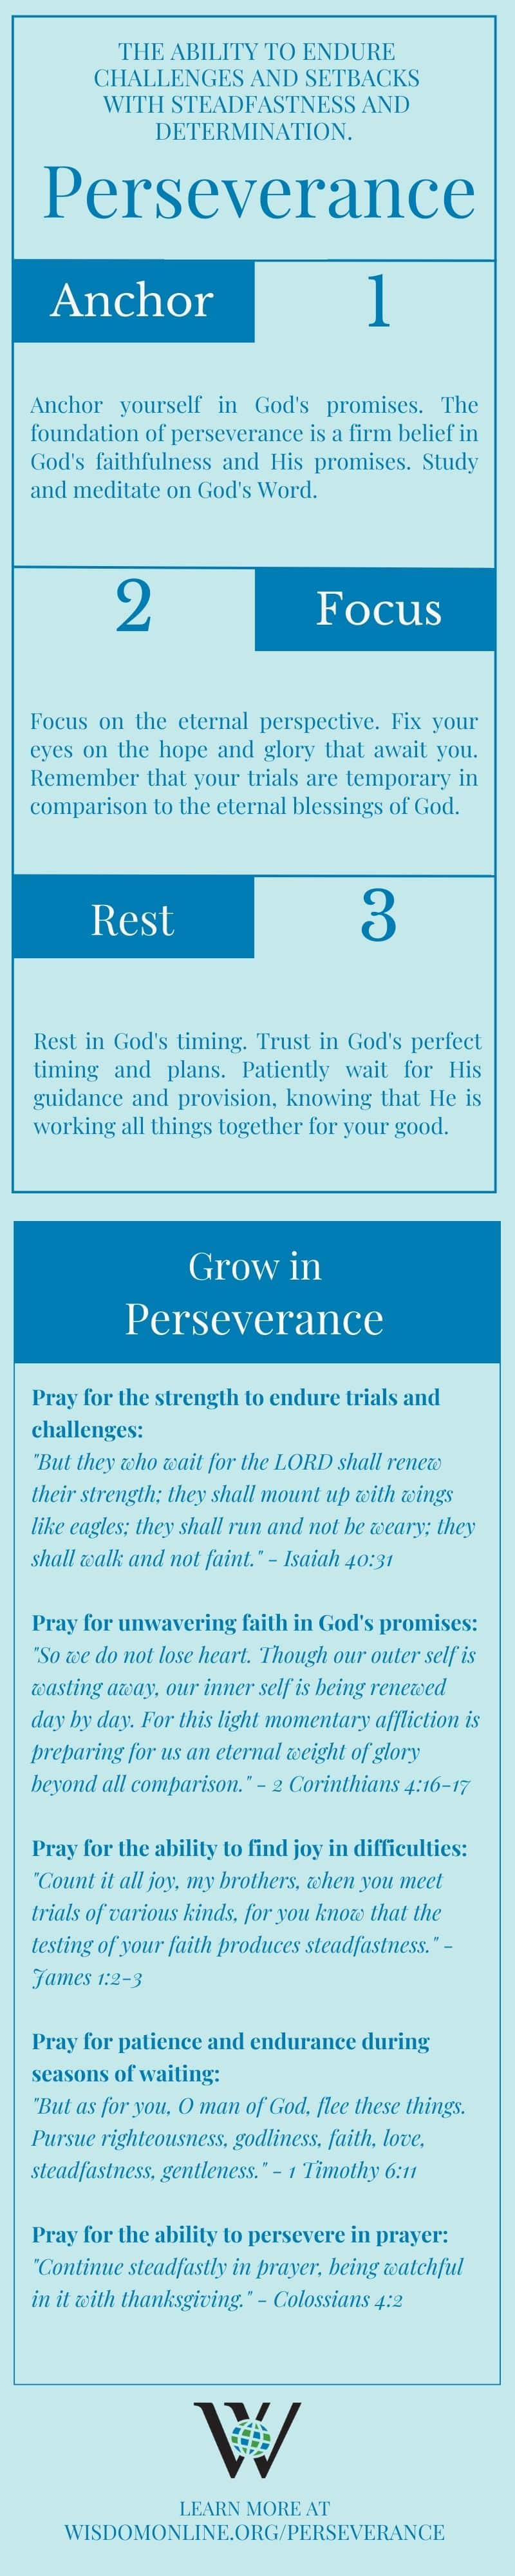 Infographic on the Biblical characteristic of Perseverance